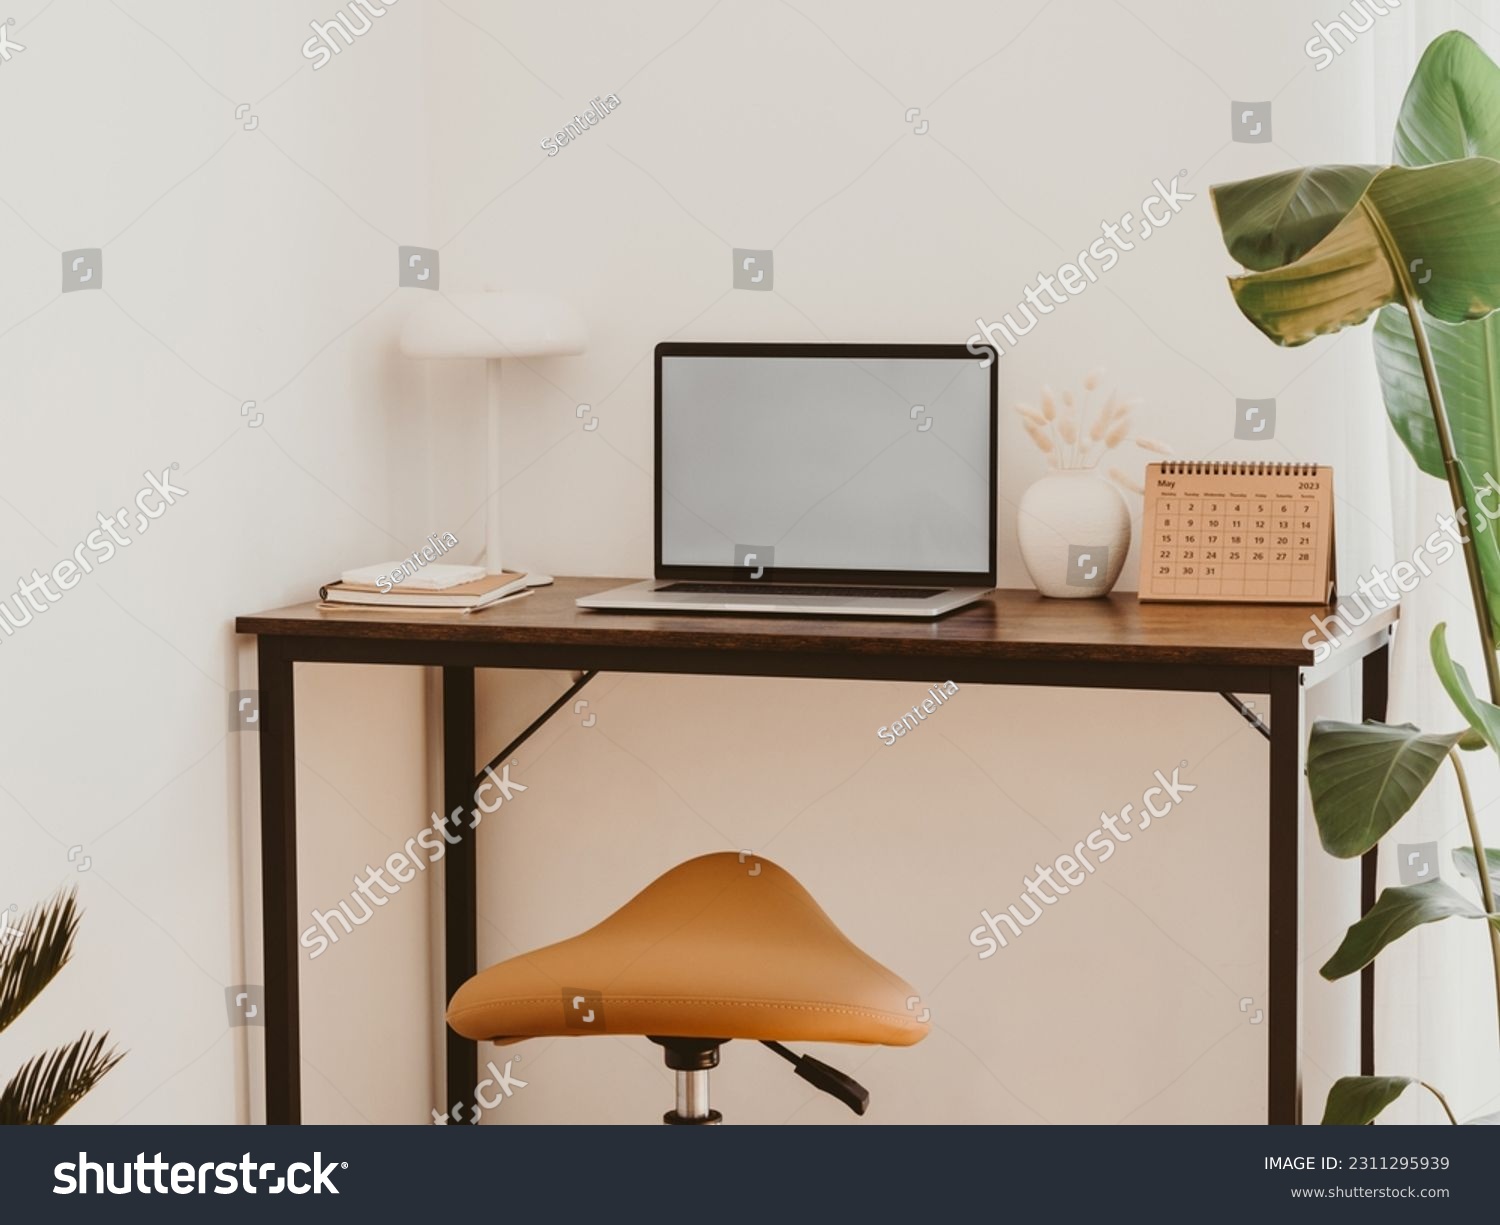 Stylish home office interior with laptop screen mockup, wooden table, plant, notes, saddle stool and elegant office accessories in designer apartment. #2311295939